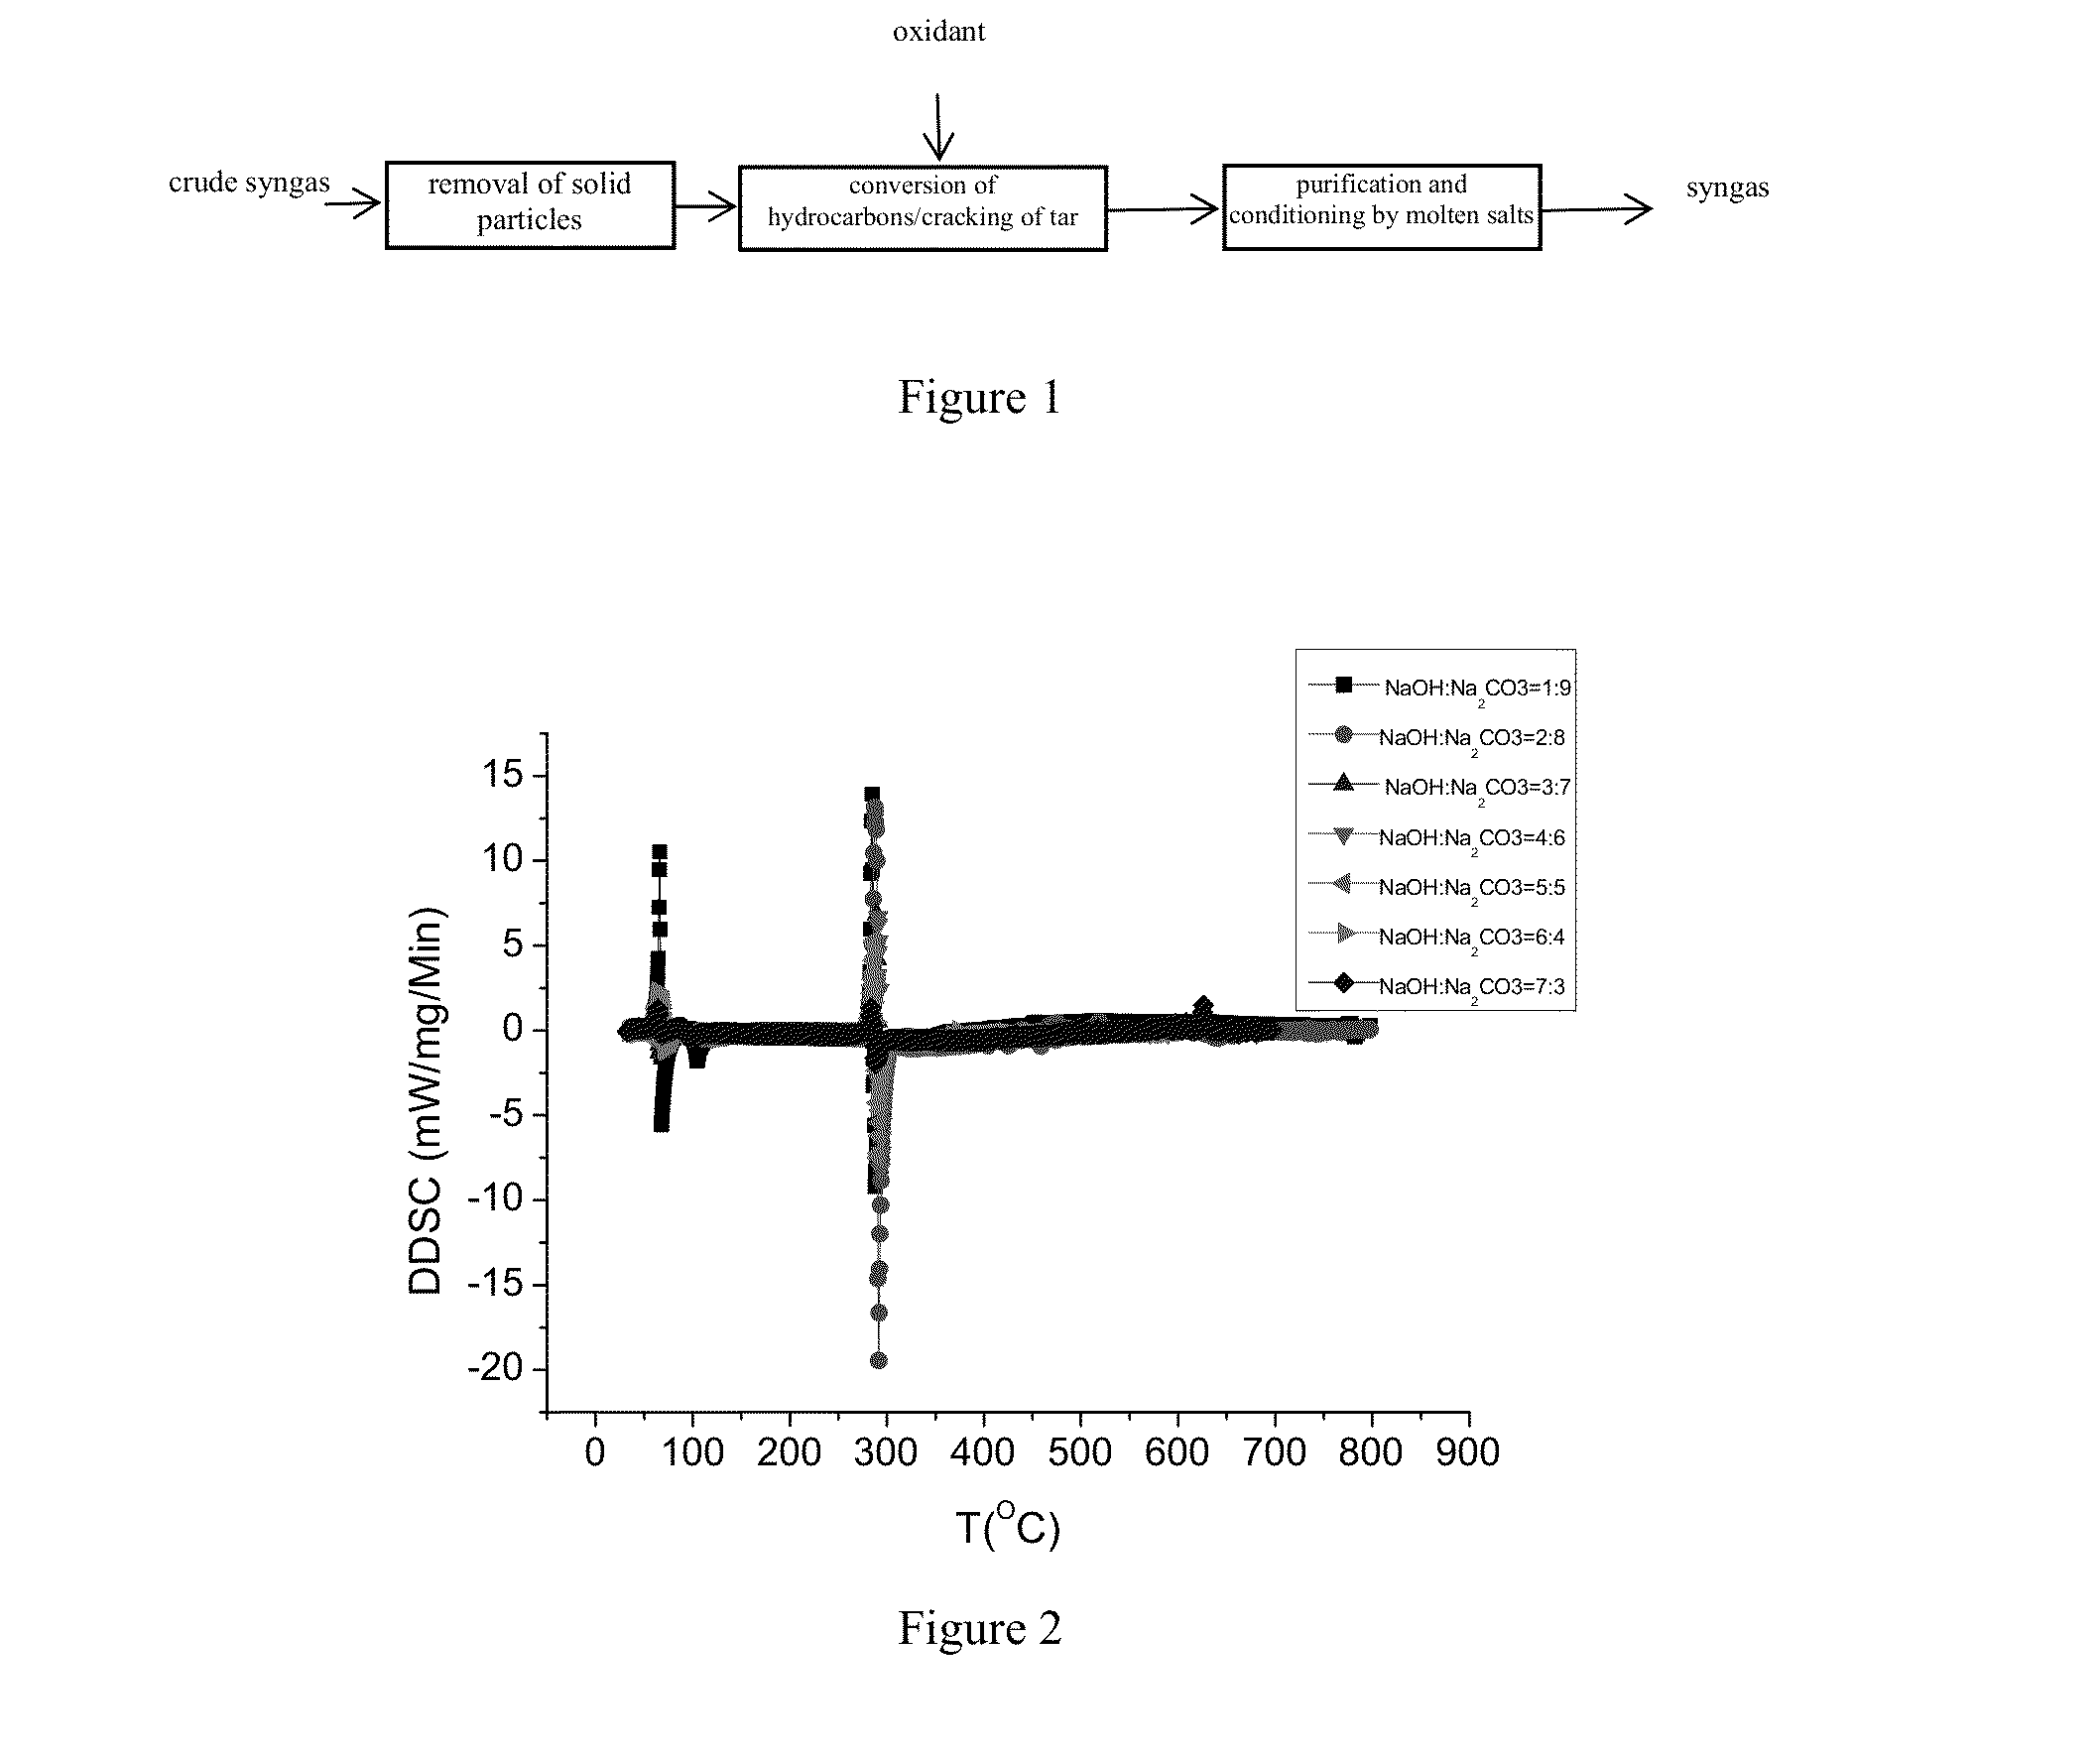 Method for purification and conditioning of crude syngas based on properties of molten salts